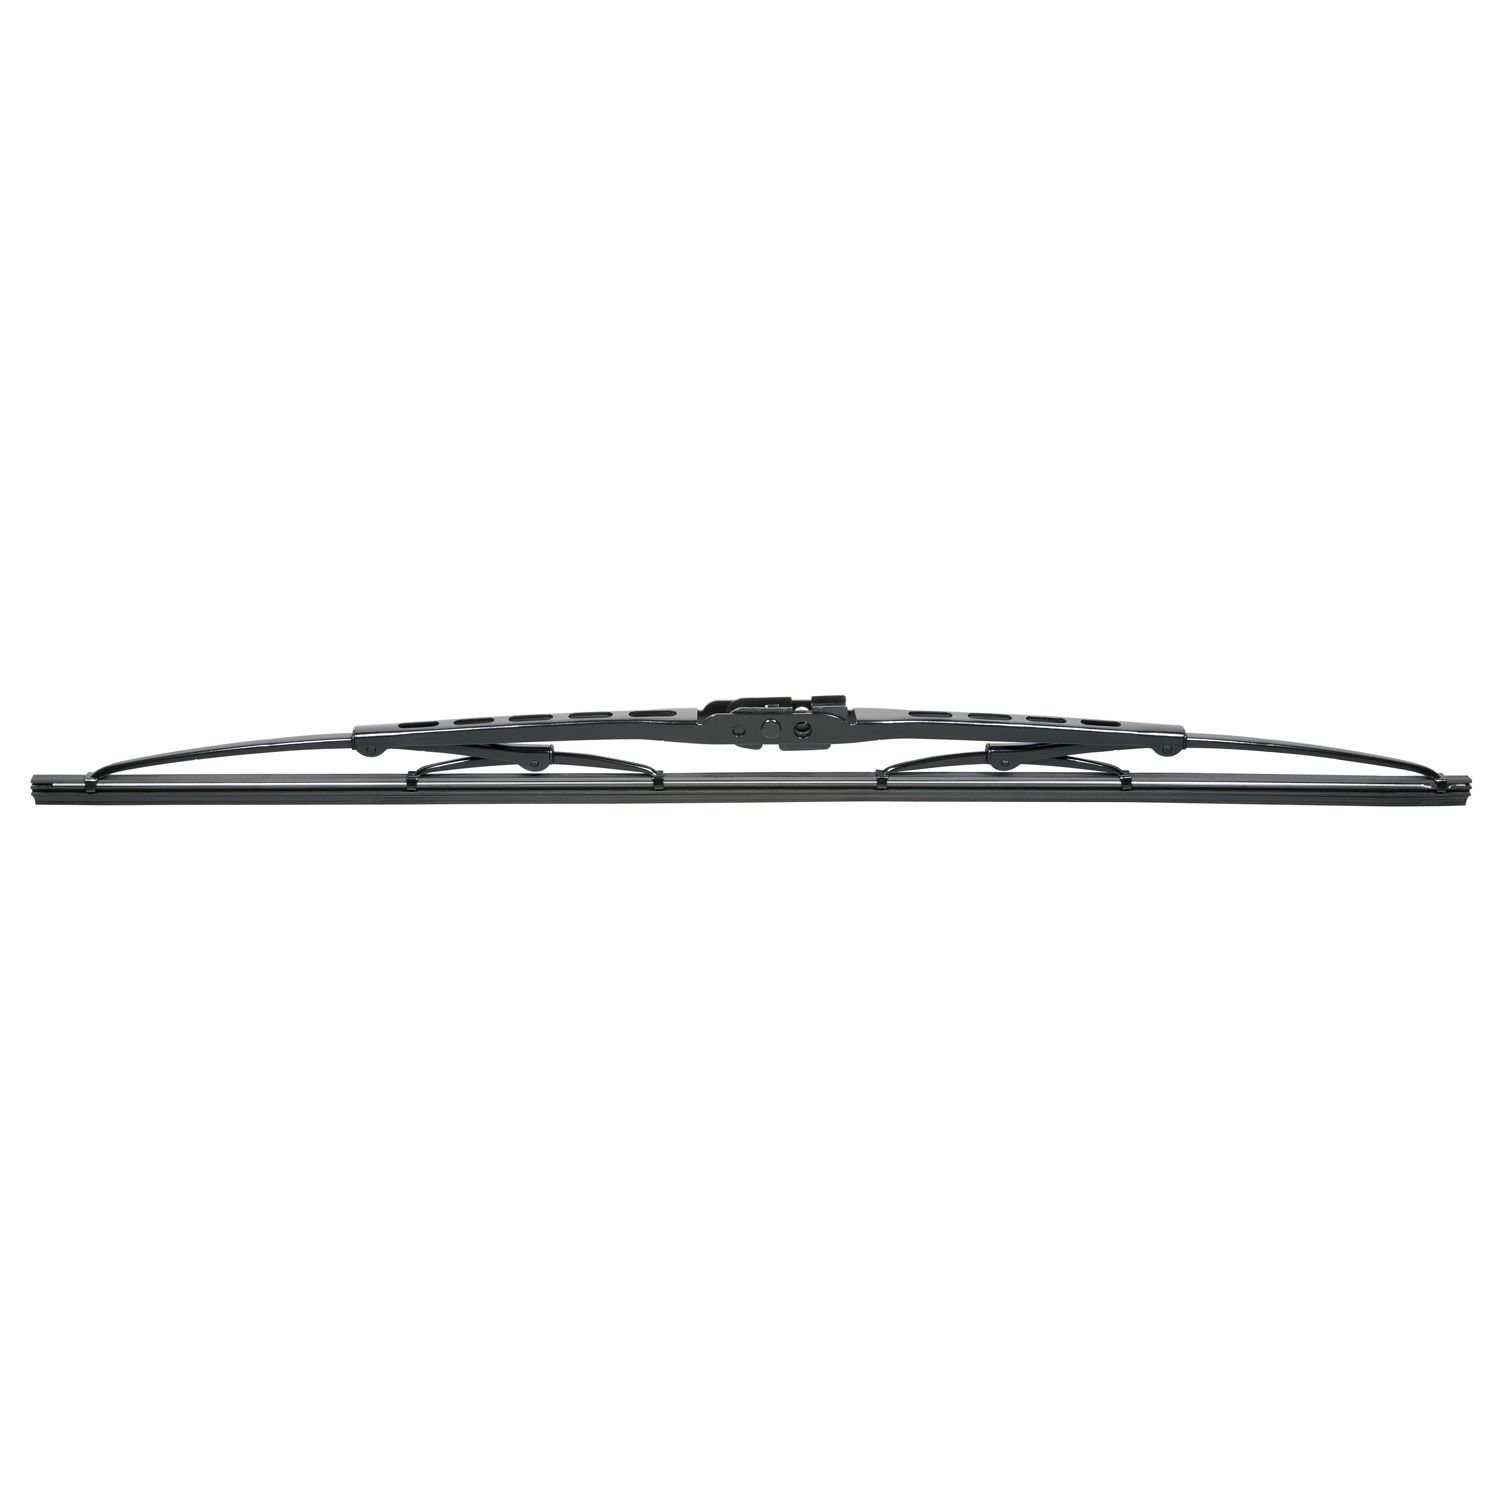 TRICO Exact Fit 20-2, Conventional Windshield 20 Inch Wiper Blade - Fits Chevy Corvette, Ford Tempo, Ford E-150